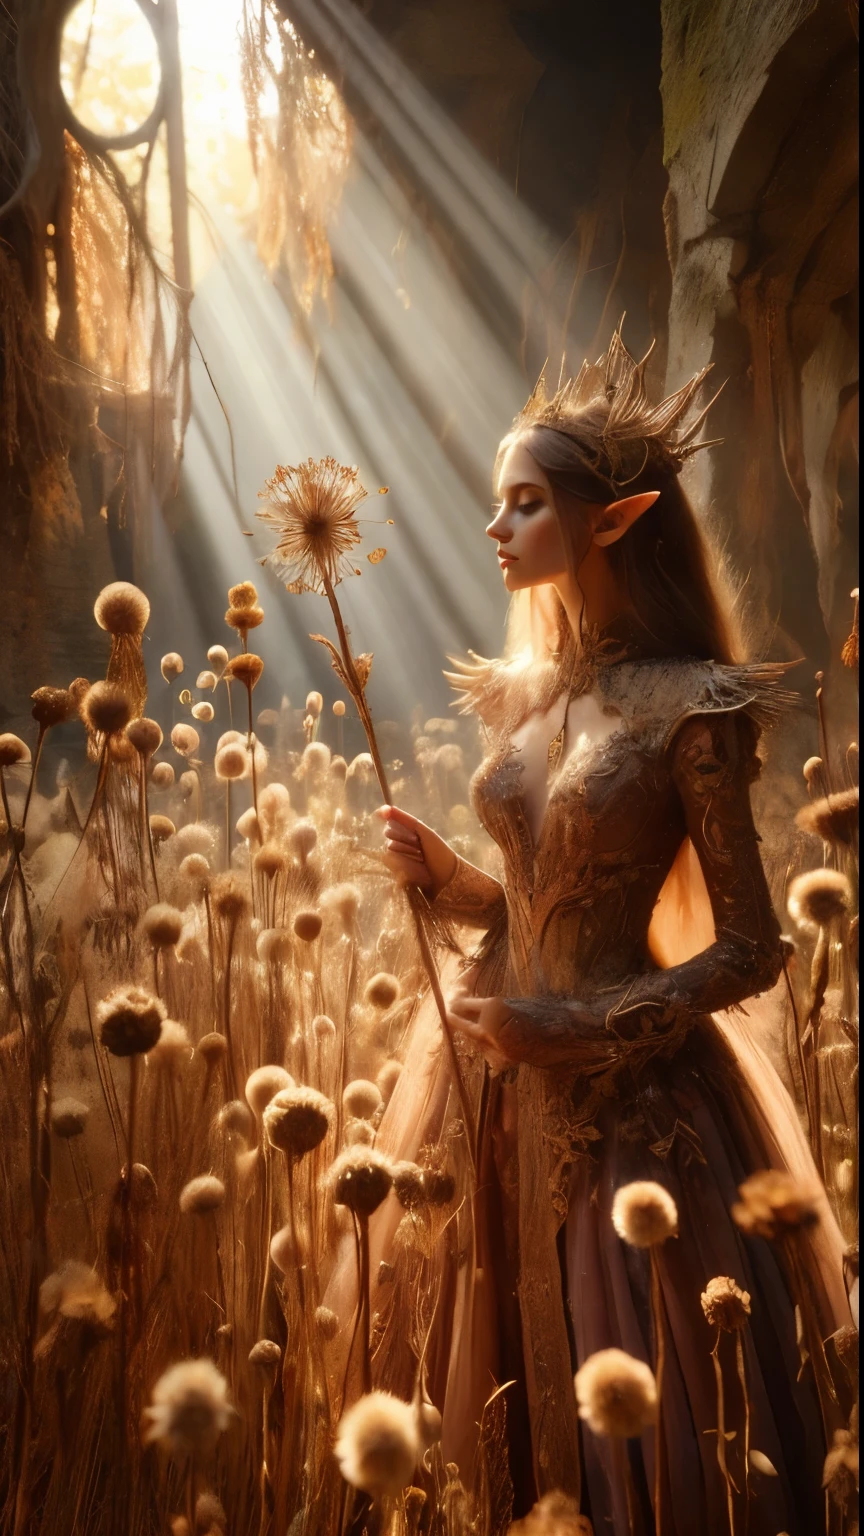 In a dappled, ancient forest ruin, an Elf Princess stands tall close to camera, closeup shot, her scepter raised high as beams of warm sunlight filter through the dried withered grasses and dry seedpods, casting a golden halo around her regal figure. covered in an ultra-multitude of small dry flowers and vines, very tall overgrown varied dry wildflower beds surround her, her beautiful, enchanted clothing shimmers in the soft light, while dry lush foliage and vines surround her, creating a lush environment. The camera captures a sharp focus on the princess's face, with the rule of thirds composition placing her at the intersection of two diagonals. Shot during the golden hour, the scene exudes an ethereal mood, inviting the viewer to step into this mystical realm., ,fantasy, better_hands, leonardo, angelawhite, Enhance